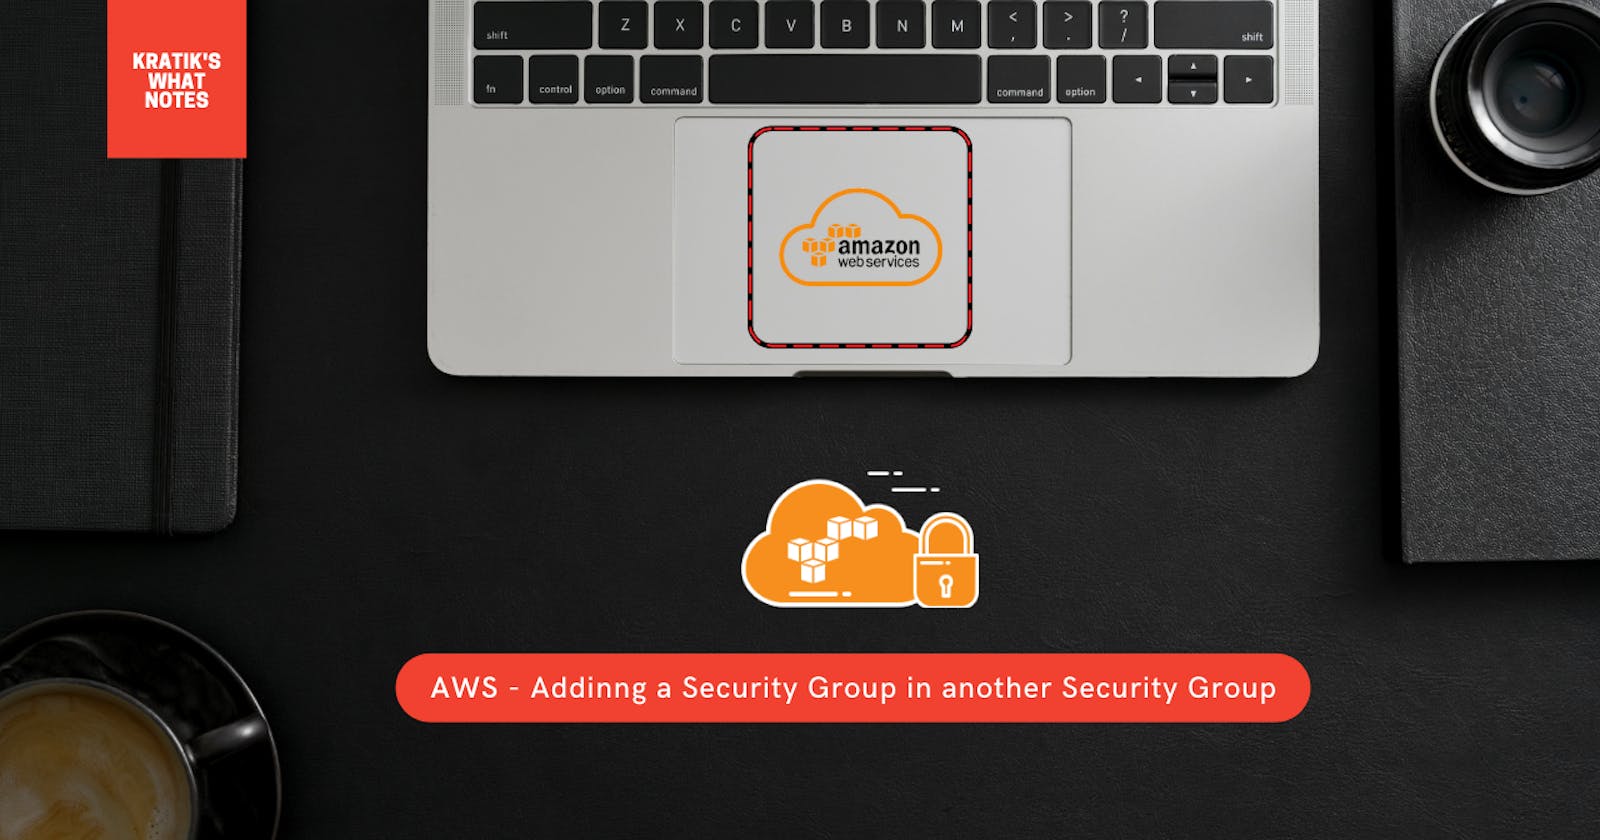 What does it mean by adding a Security Group ID as a source in another Security Group ?